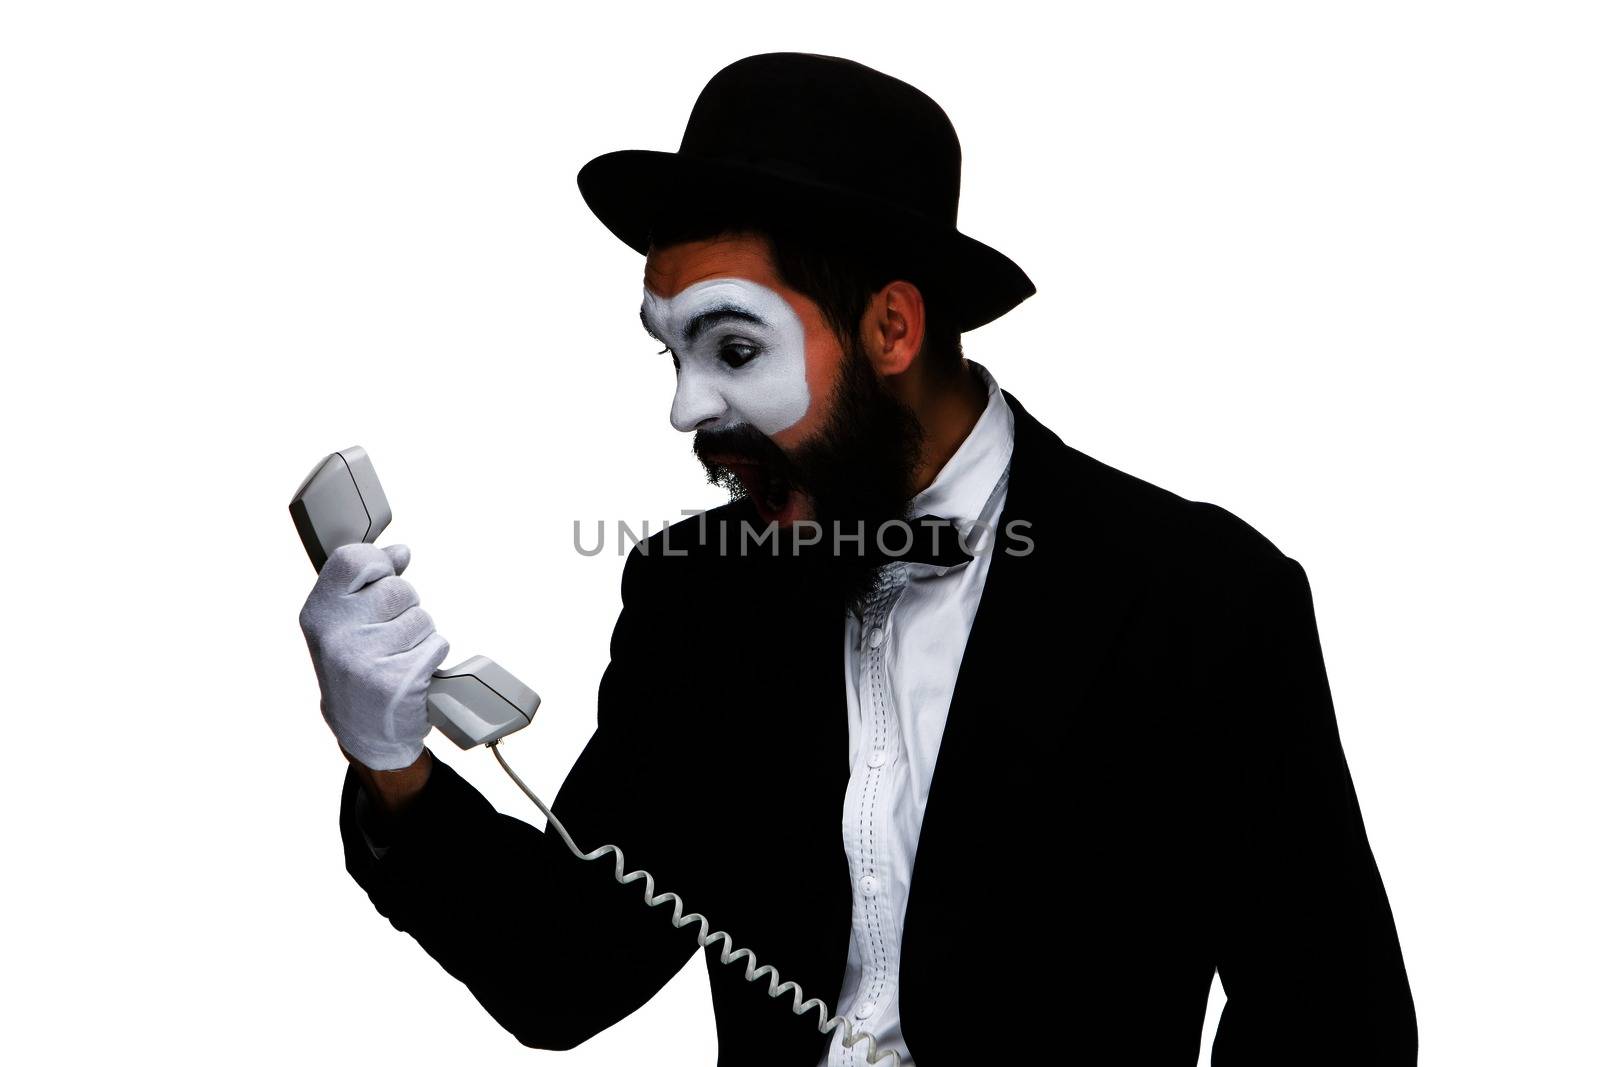 An angry and irritated young man screams into the telephone receiver isolated on white background. The concept of business relations